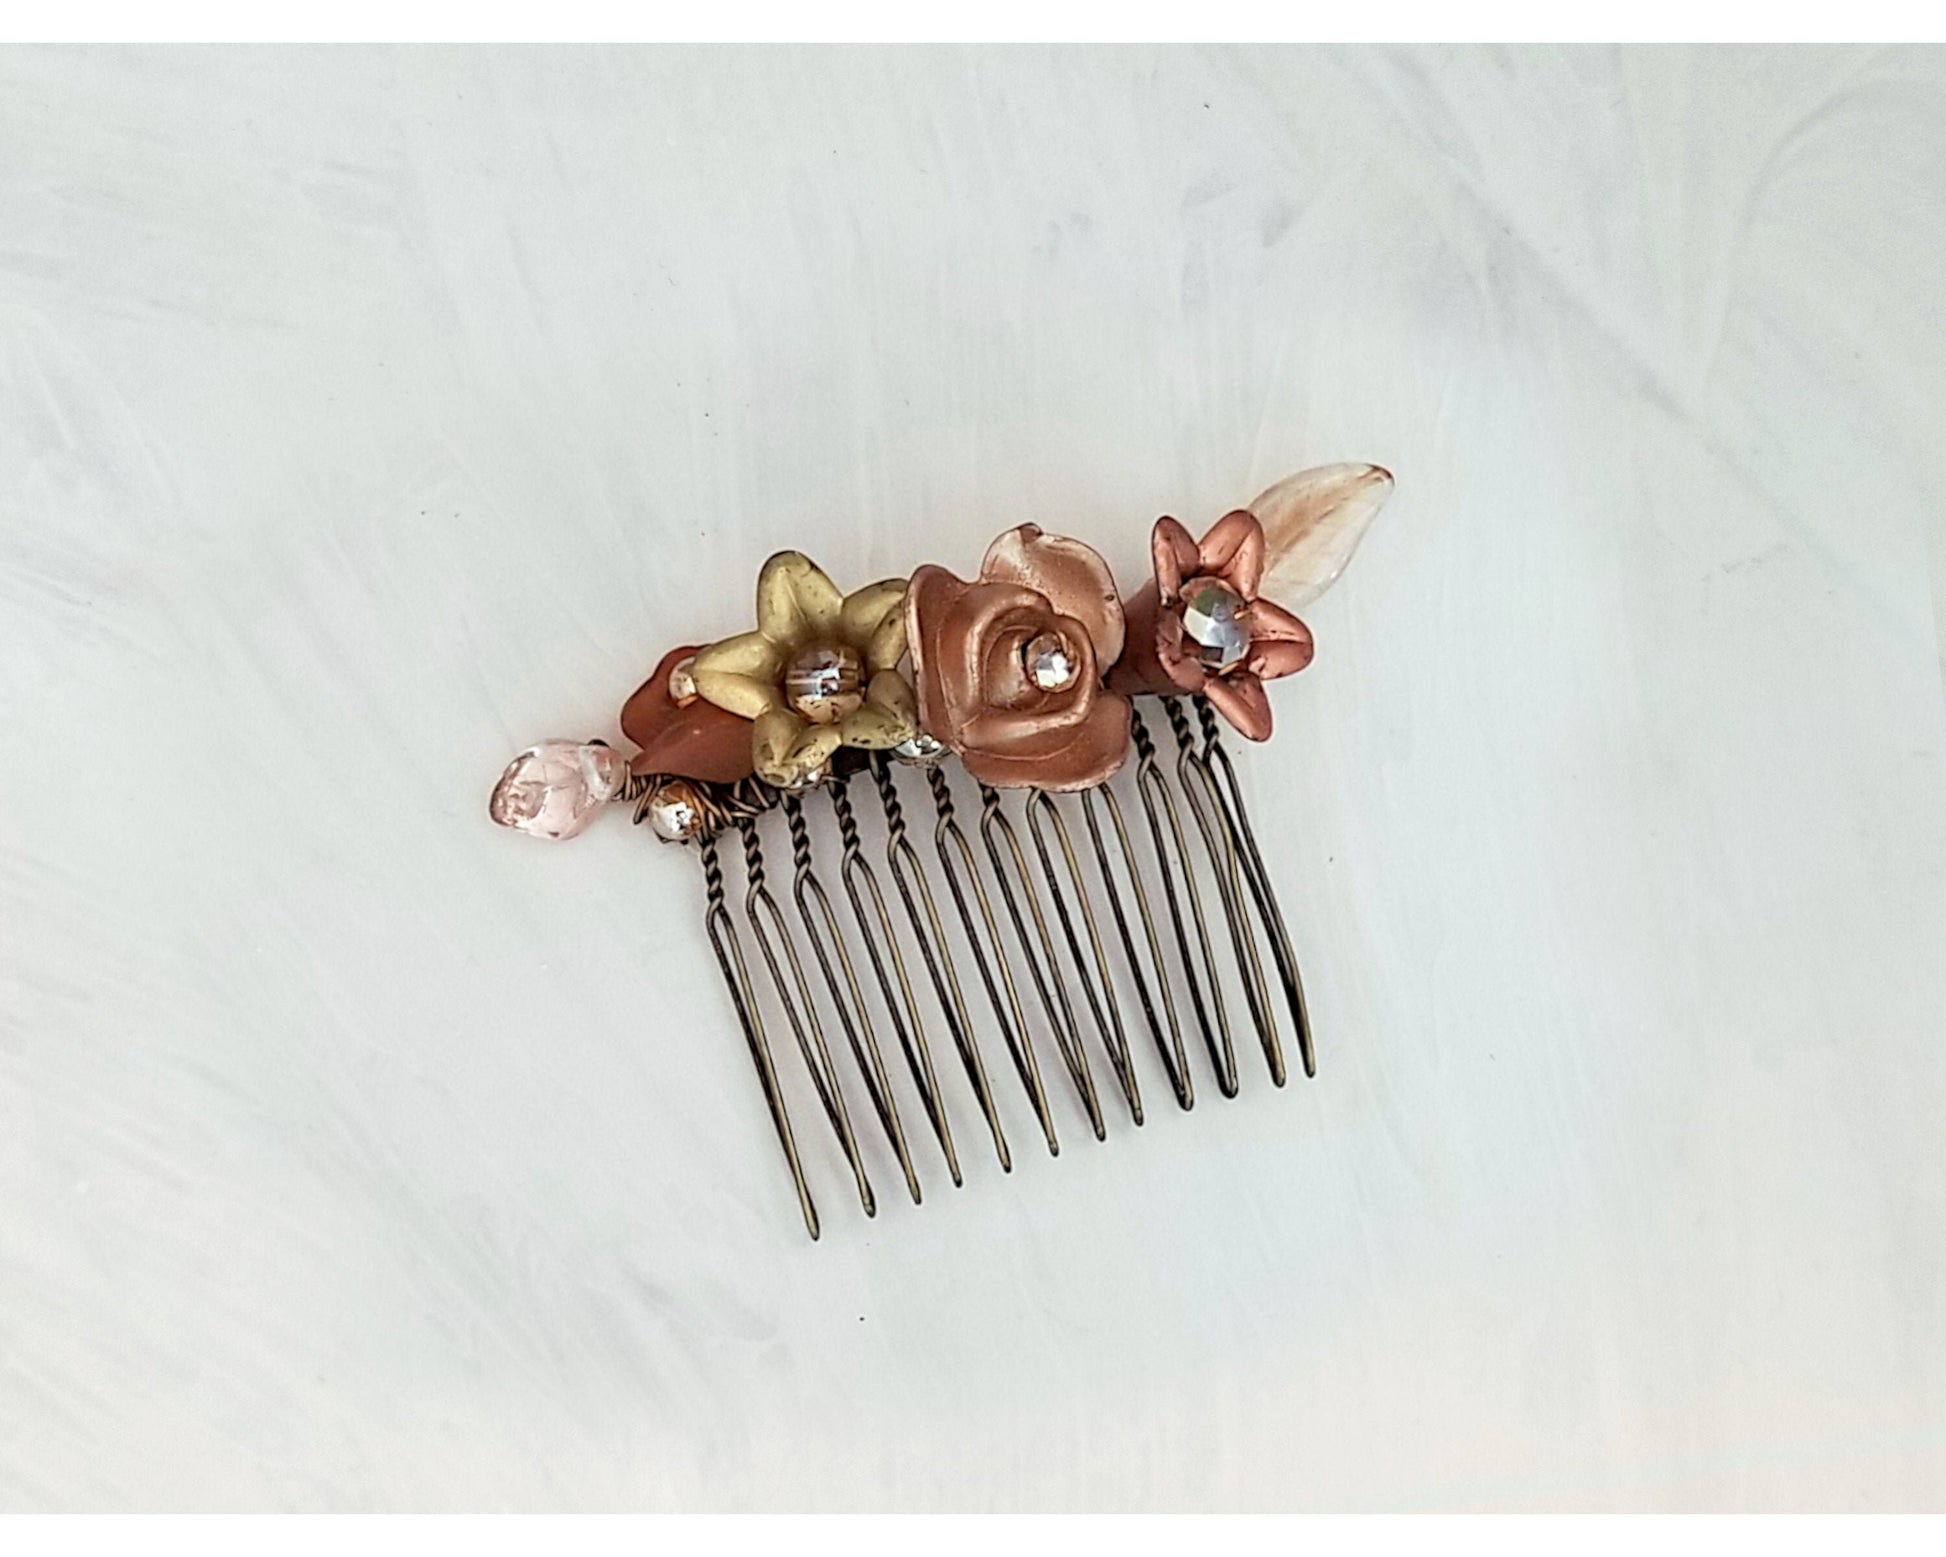 Wire Wrapped Lucite Flower Comb in Mixed Metallics, Bridesmaid, Wedding, Floral, Garden, Party, Boho, Bohemian, Choice of Colors and Metals